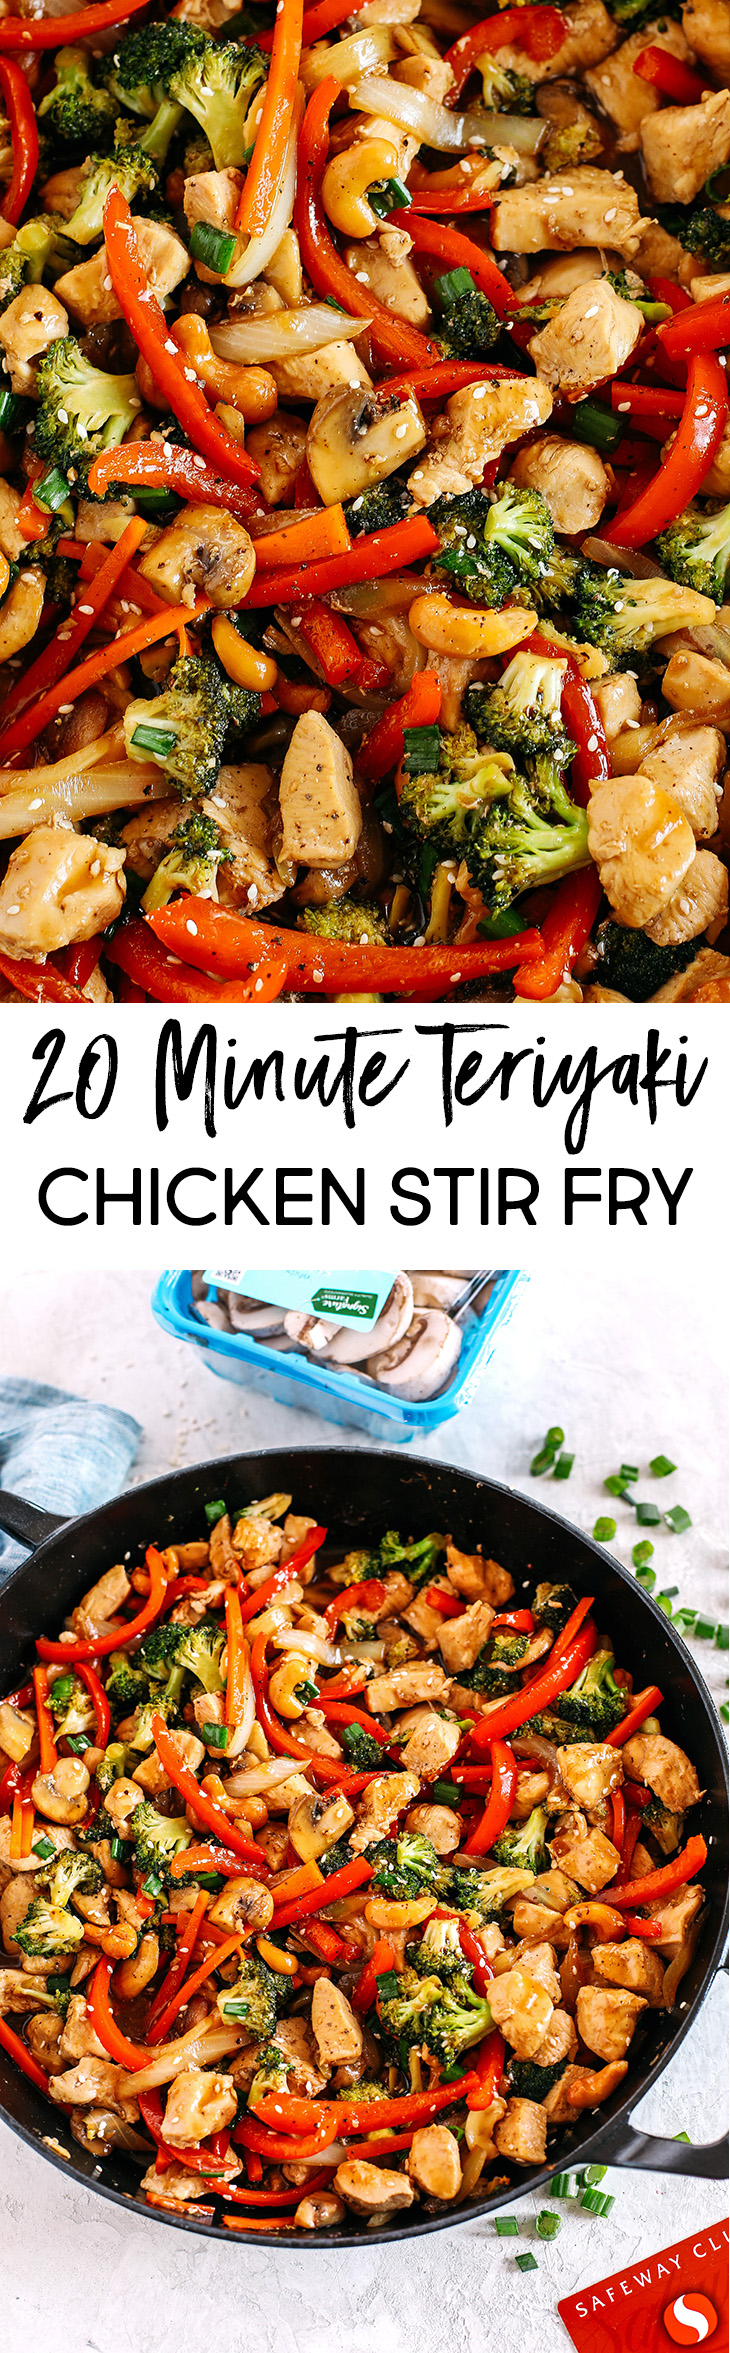 This Teriyaki Chicken Stir Fry is the perfect weeknight meal that is quick and easy to make, full of fresh veggies and tossed together in a delicious homemade teriyaki sauce!